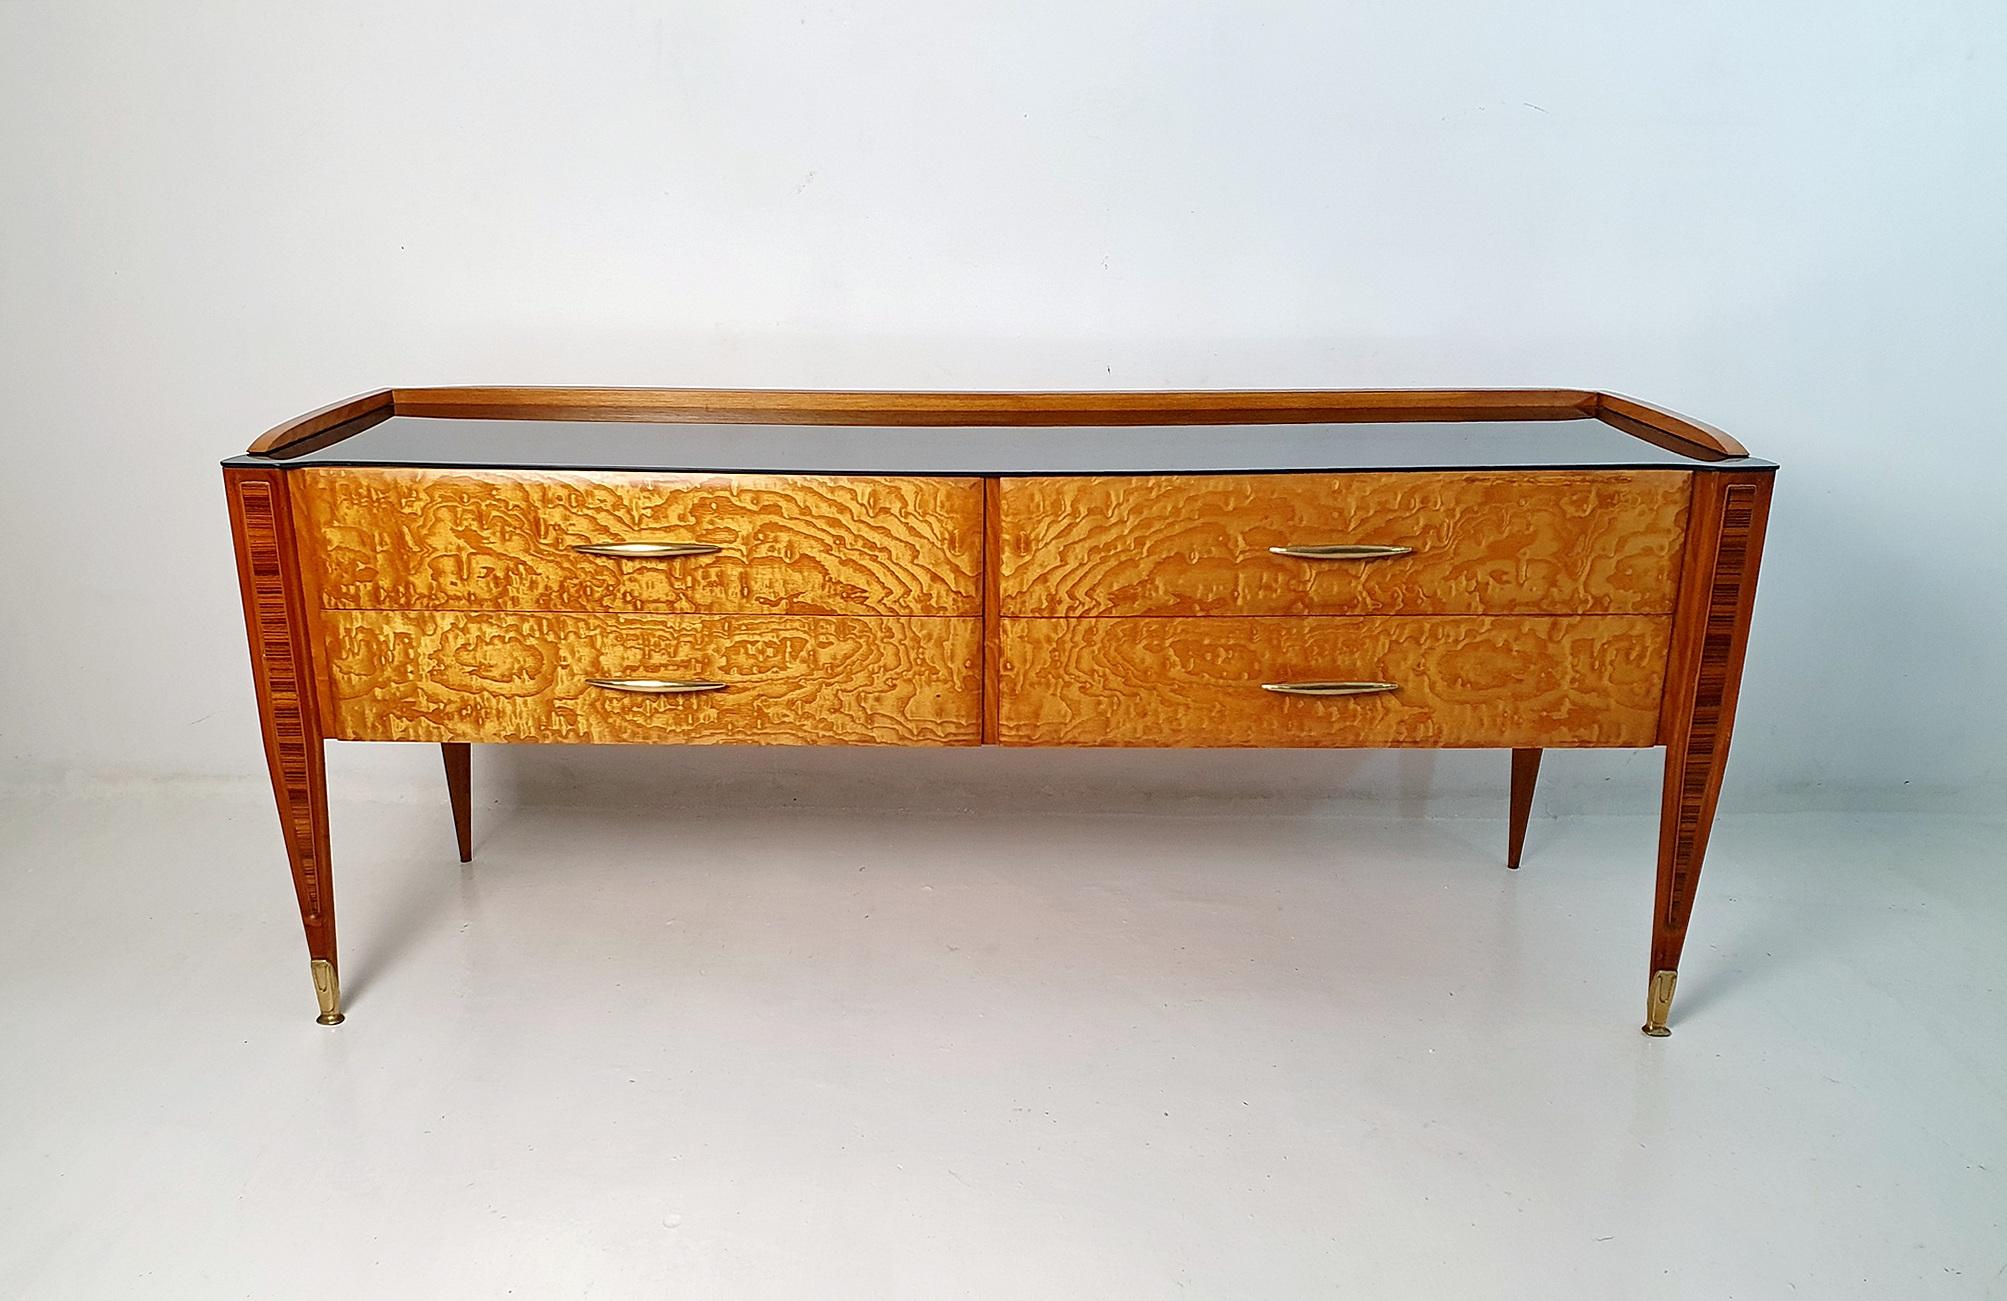 Italian designer Vittorio Dassi's midcentury credenza is a true work of art. The piece features four beveled drawers, carefully crafted from maple and walnut root, that are embellished with a striking marquetry inlay on the sculptural legs. The